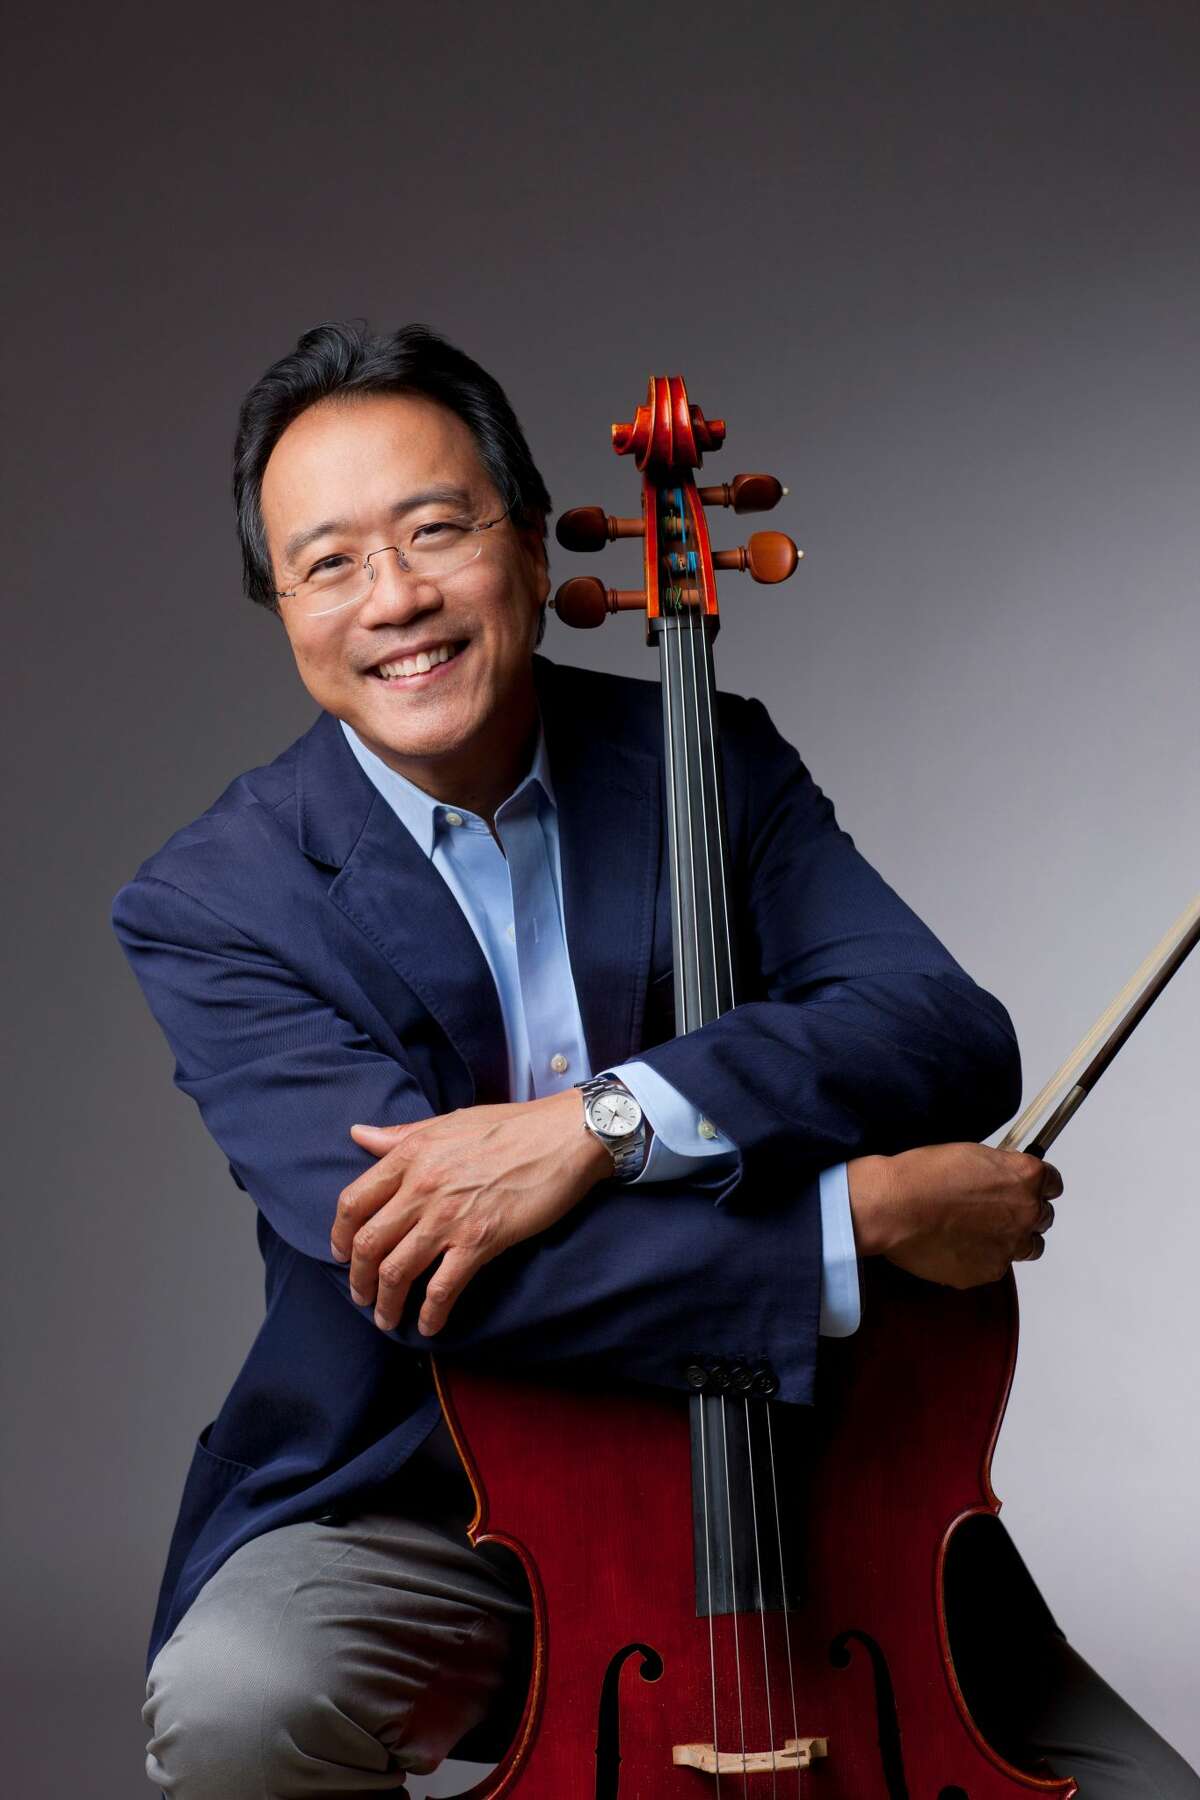 At Tanglewood in Lenox, Mass., during the summer 2022 season, Yo-Yo Ma will lead a Tanglewood Music Center cello class on Aug. 11 and perform with the Boston Symphony Orchestra on Aug. 12, 14 and during the 90th-birthday celebration for John  Williams on Aug. 20. 